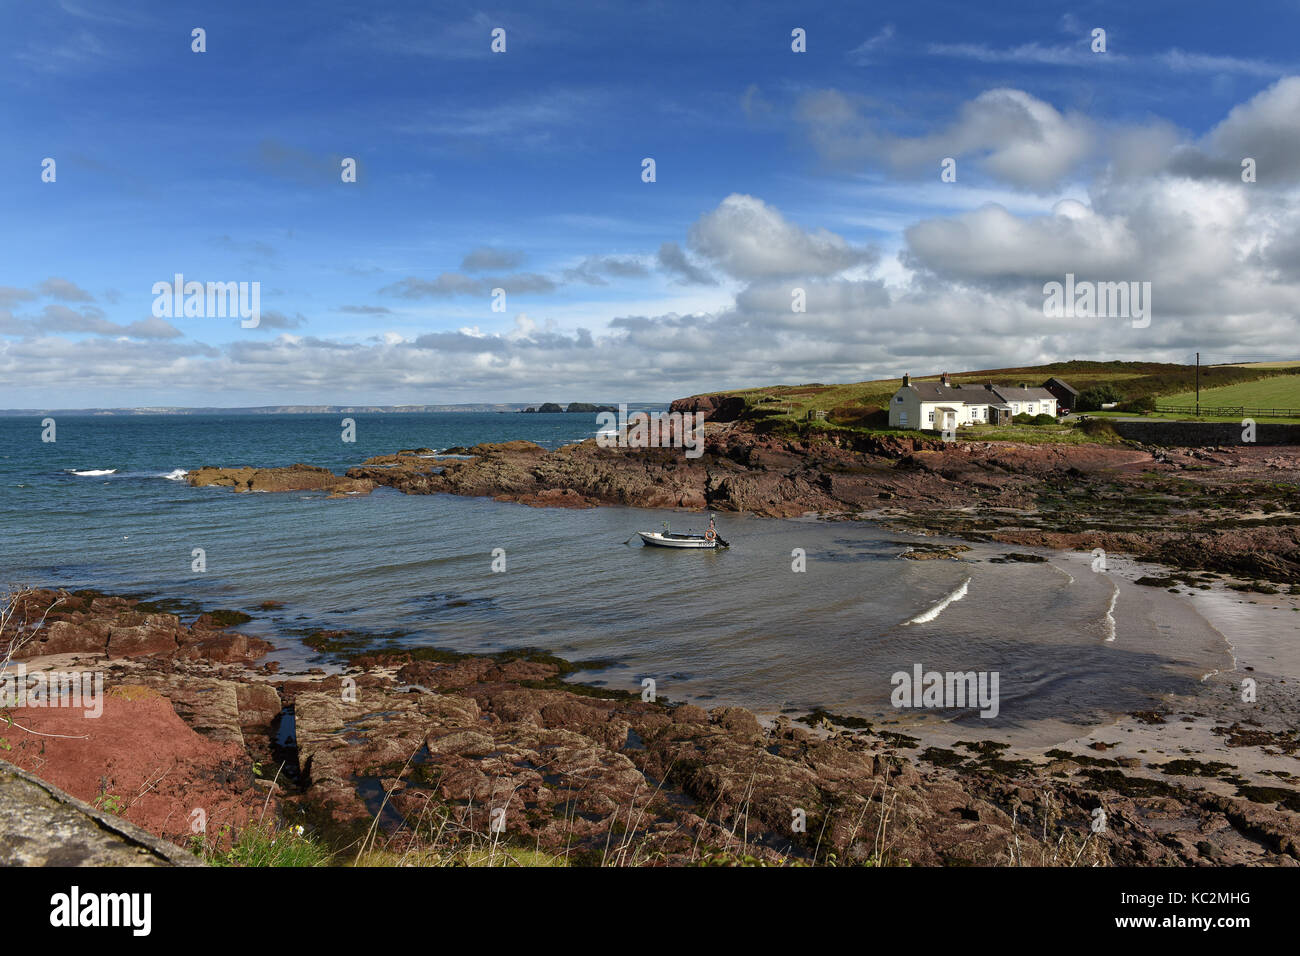 St Brides Bay on the Pembrokeshire coastline in West Wales Uk Stock Photo